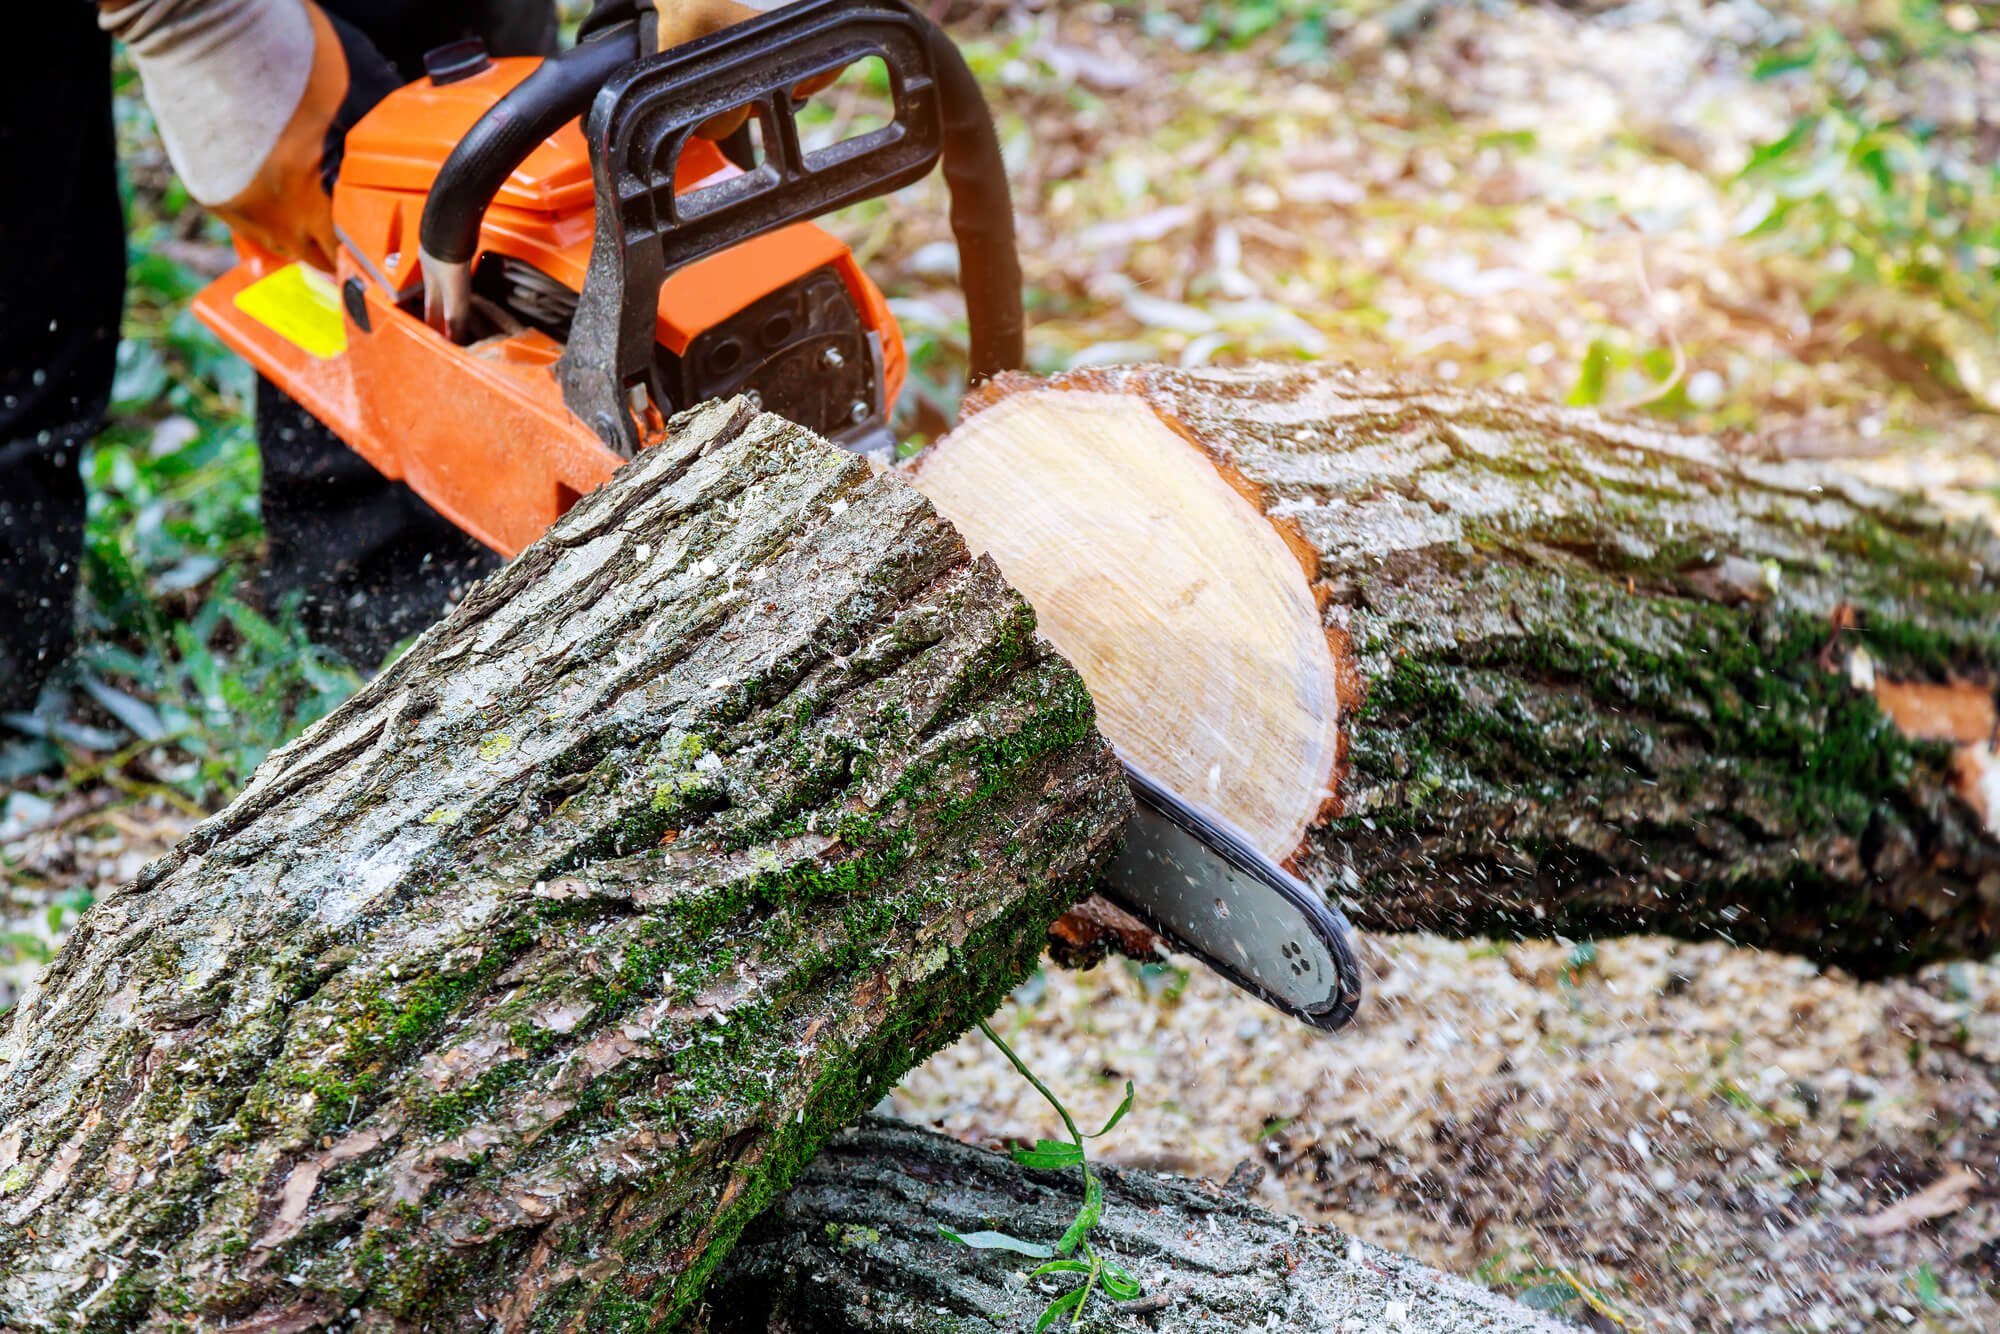 Arborist cutting uprooted broken tree with sawn chainsaw after a violent storm